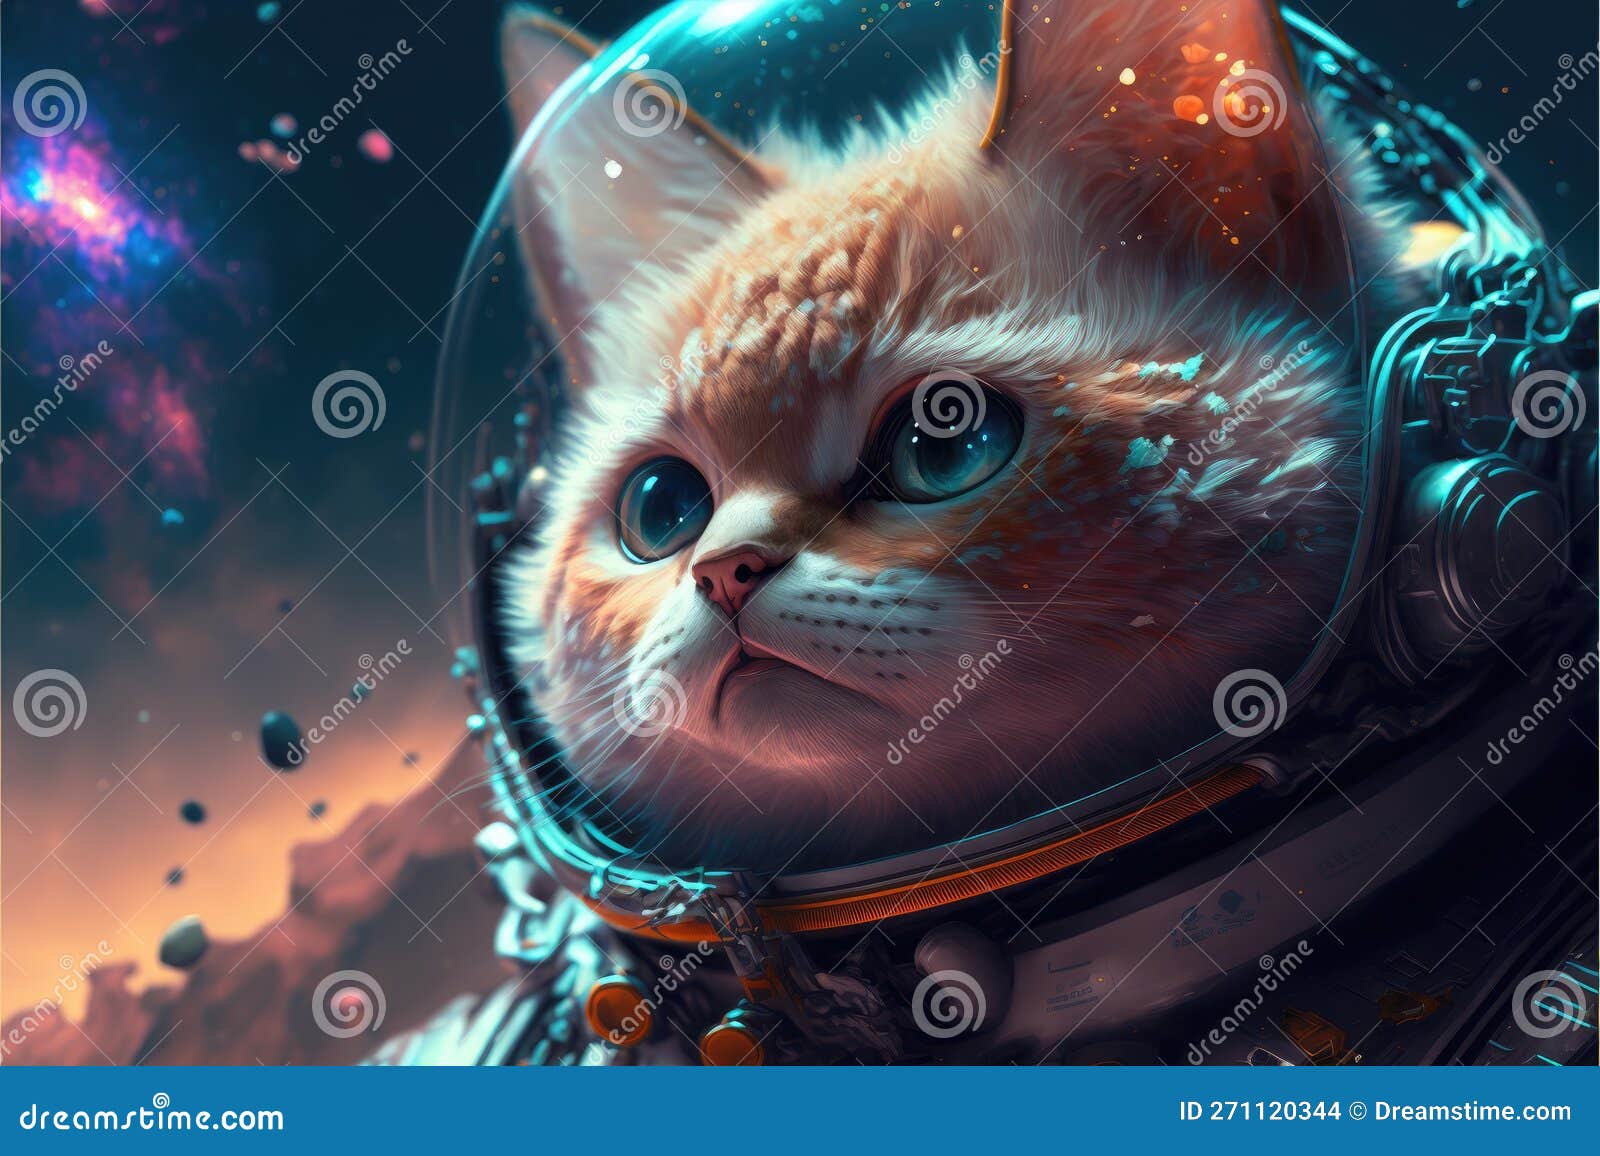 Space Cat Wallpapers  Wallpaper Cave